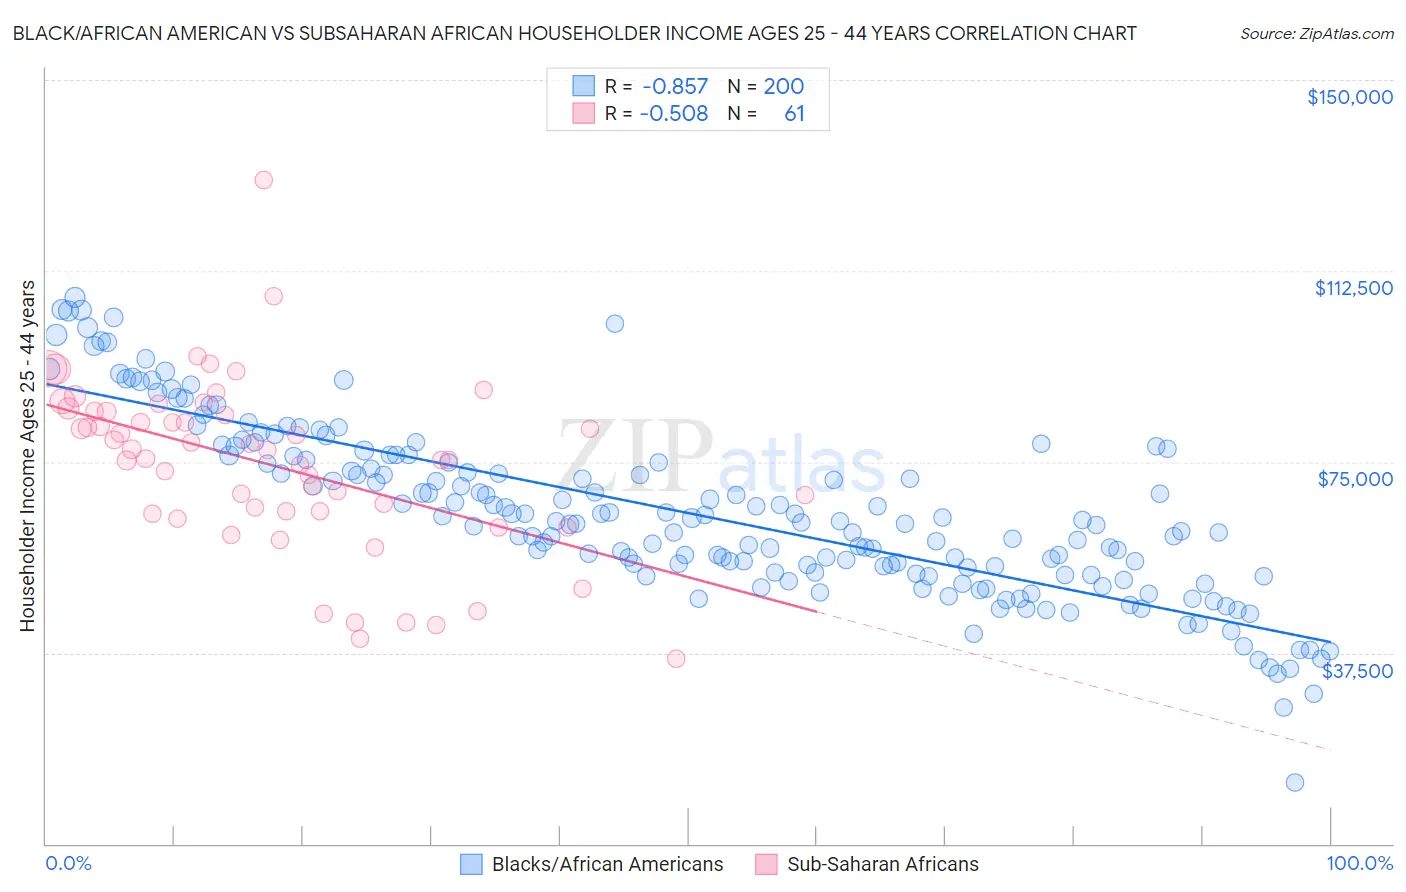 Black/African American vs Subsaharan African Householder Income Ages 25 - 44 years